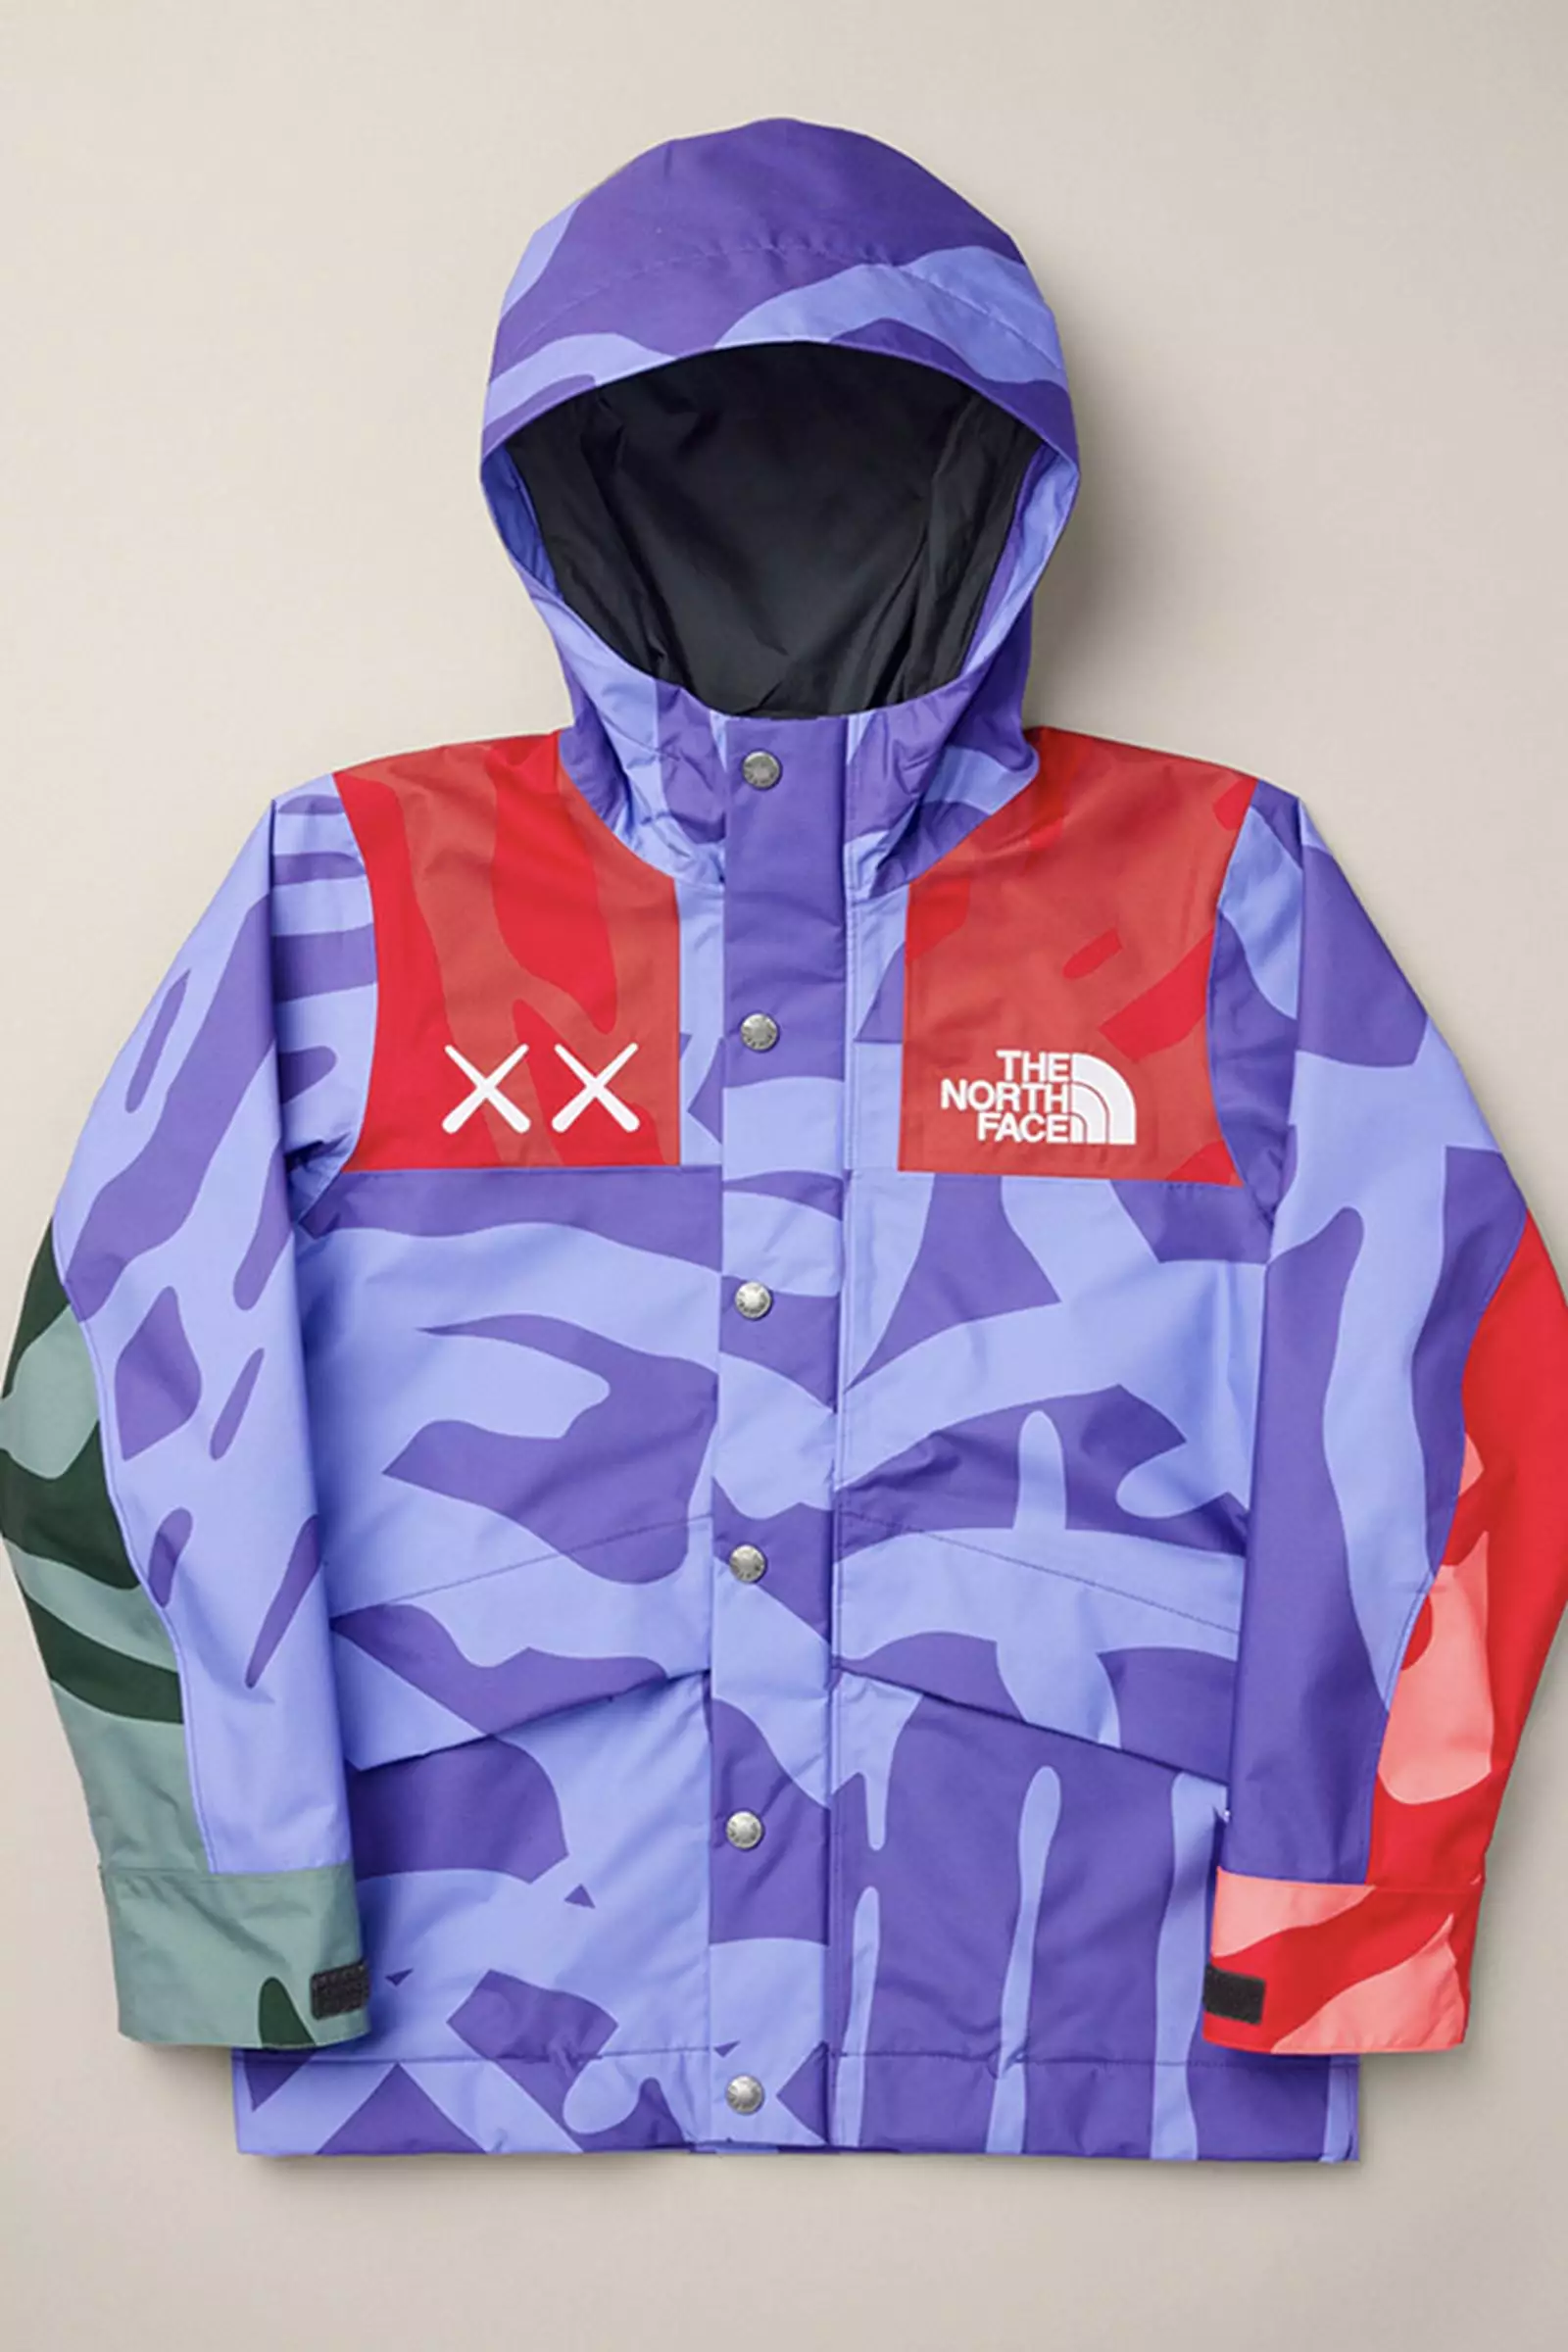 Best Style Releases: Supreme, The North Face, KAWS, Denim Tears, and More